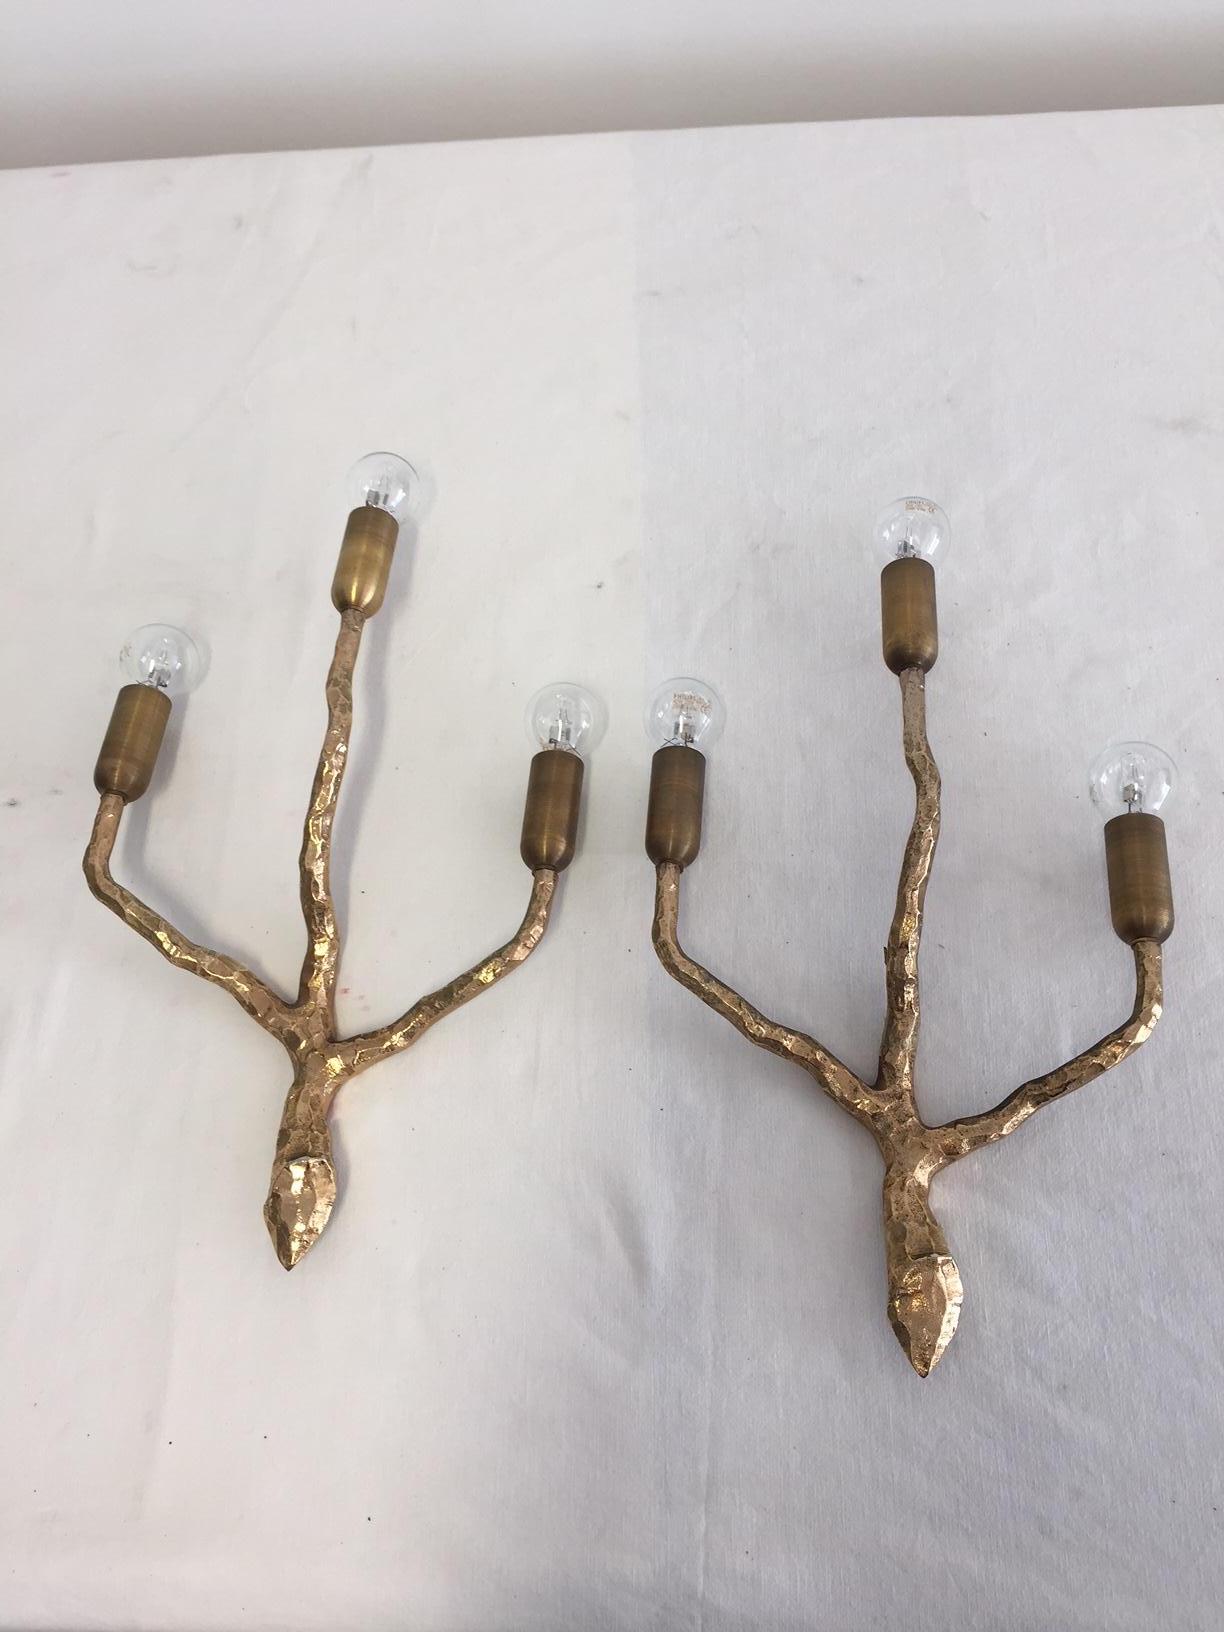 Bronze French Art Decorative Wall Sconces Three Arms by Maison Arlus For Sale